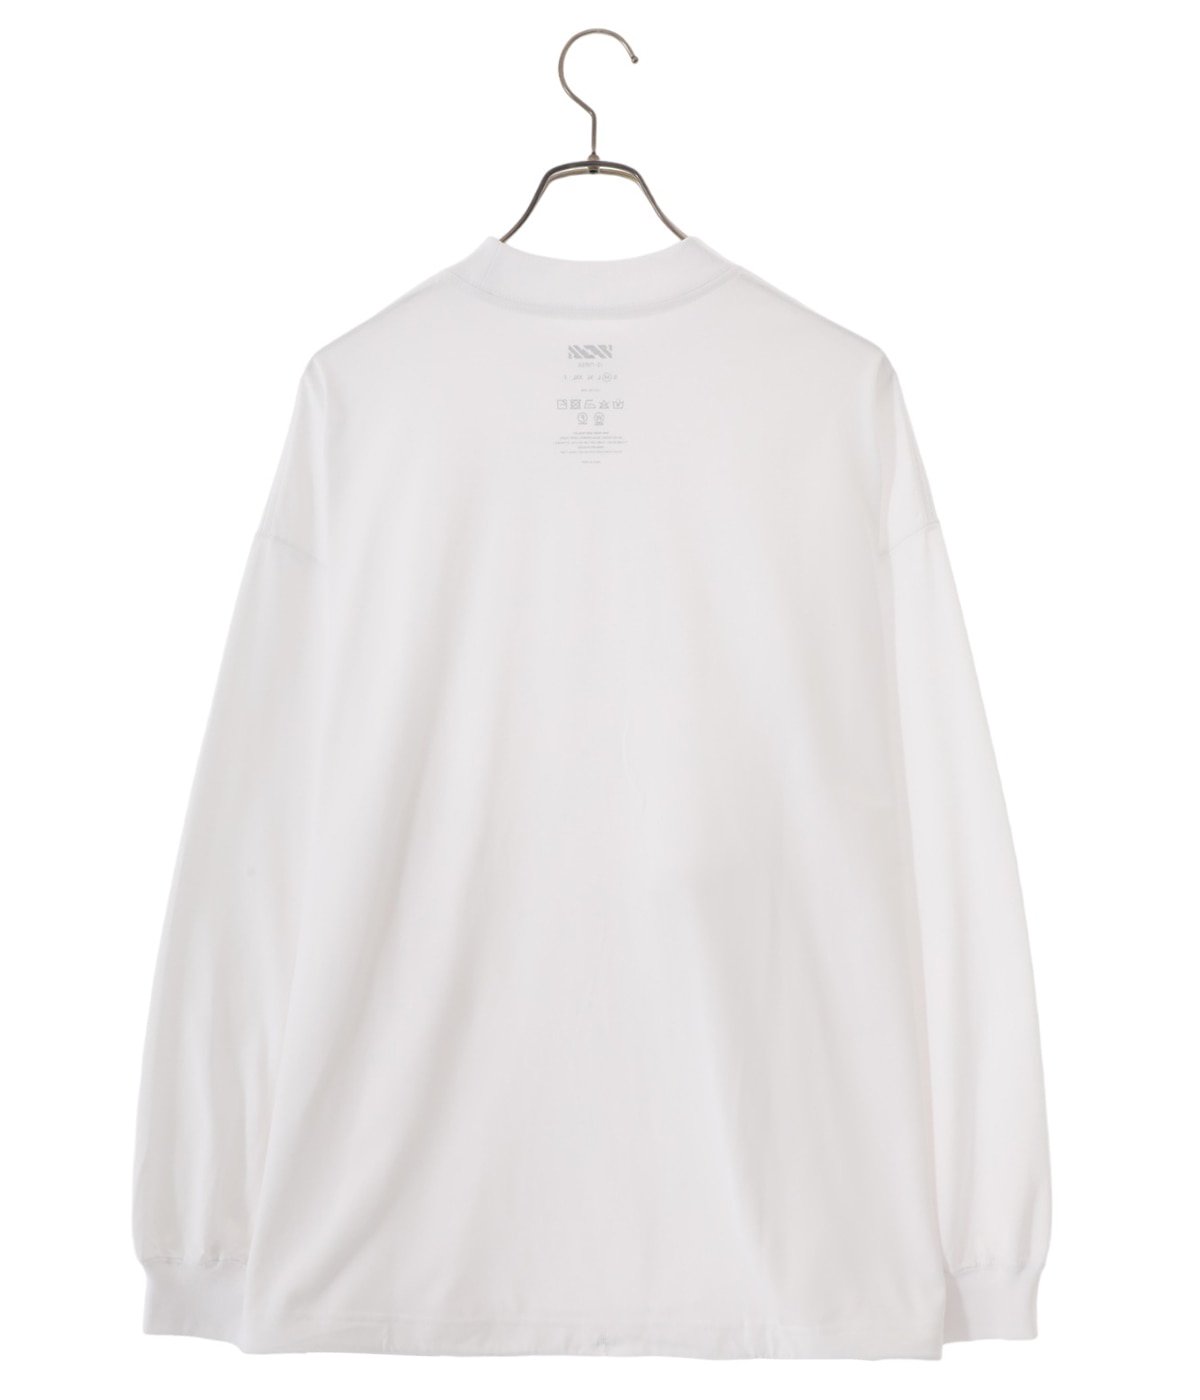 BALLOON LONG T SHIRT | is-ness(イズネス) / トップス カットソー長袖